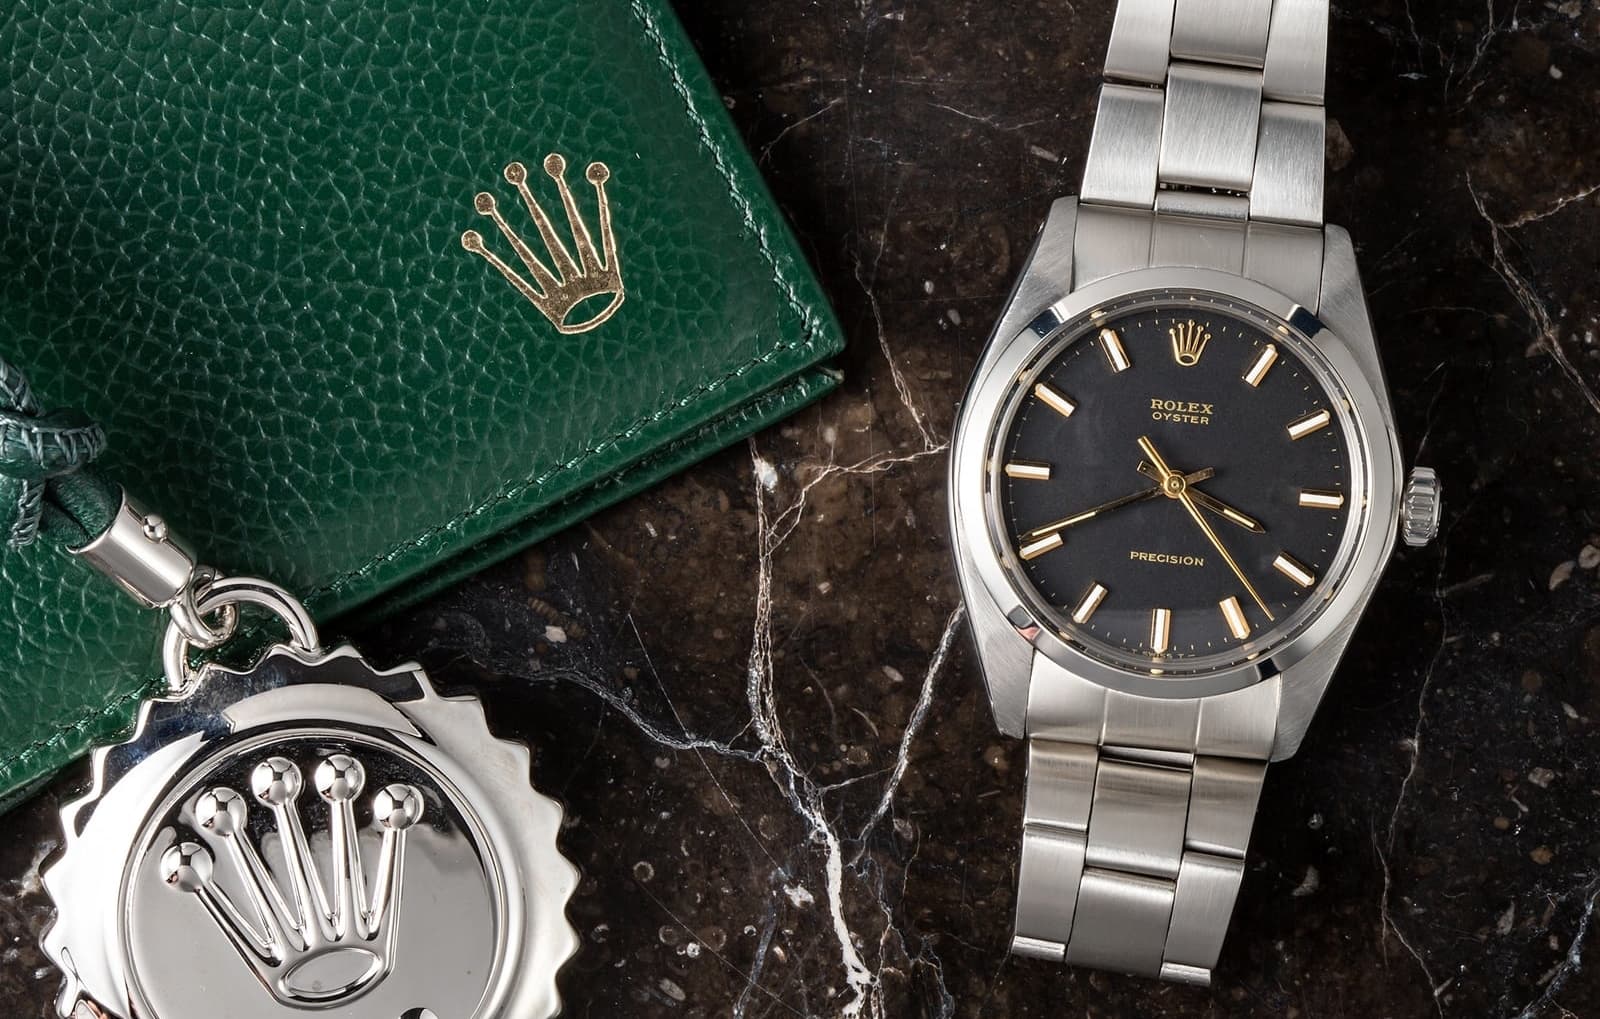 Some of Rolex's Non-Chronometer Watches